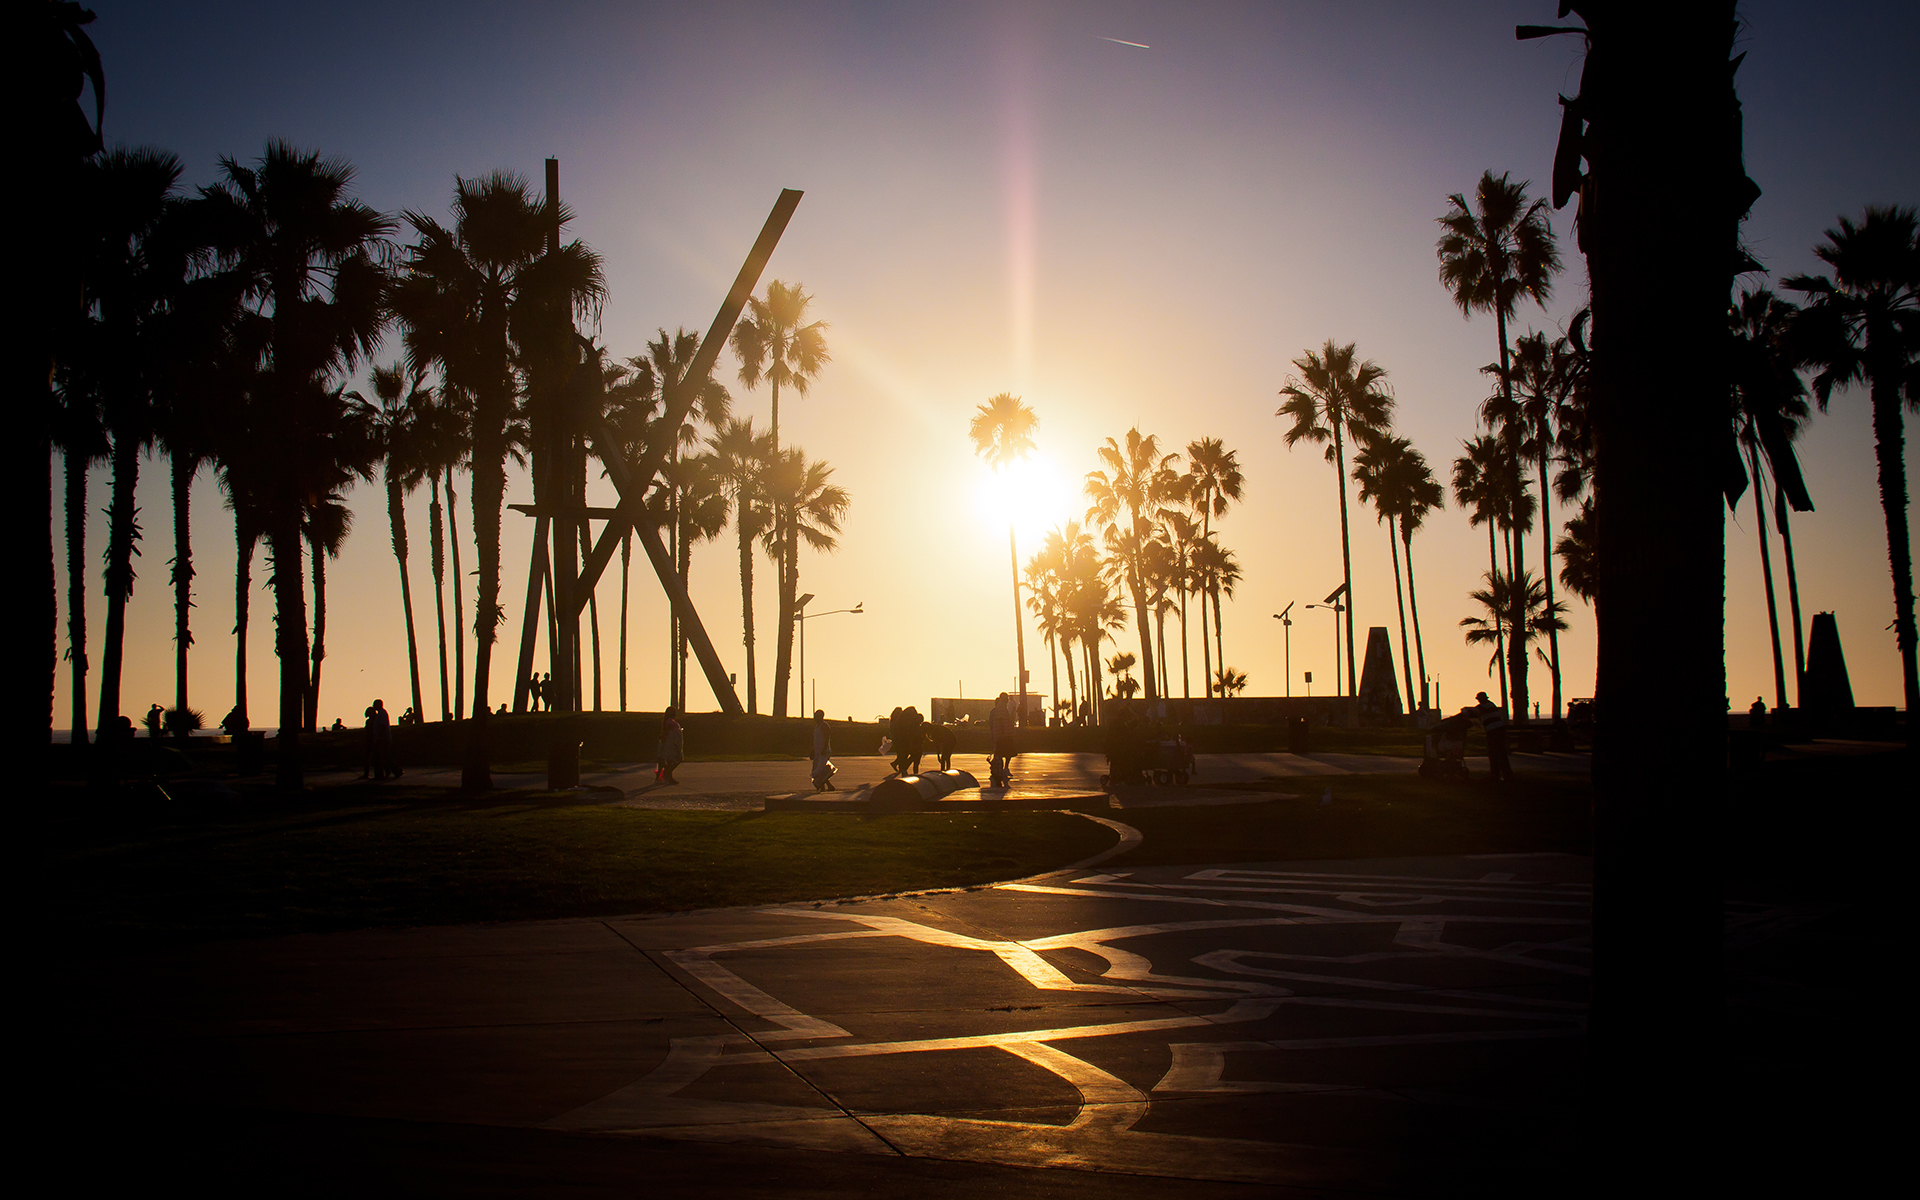 Free download summer venice beach la los angeles california palm wallpapers x for your desktop mobile tablet explore venice beach california wallpaper california beach wallpaper long beach california